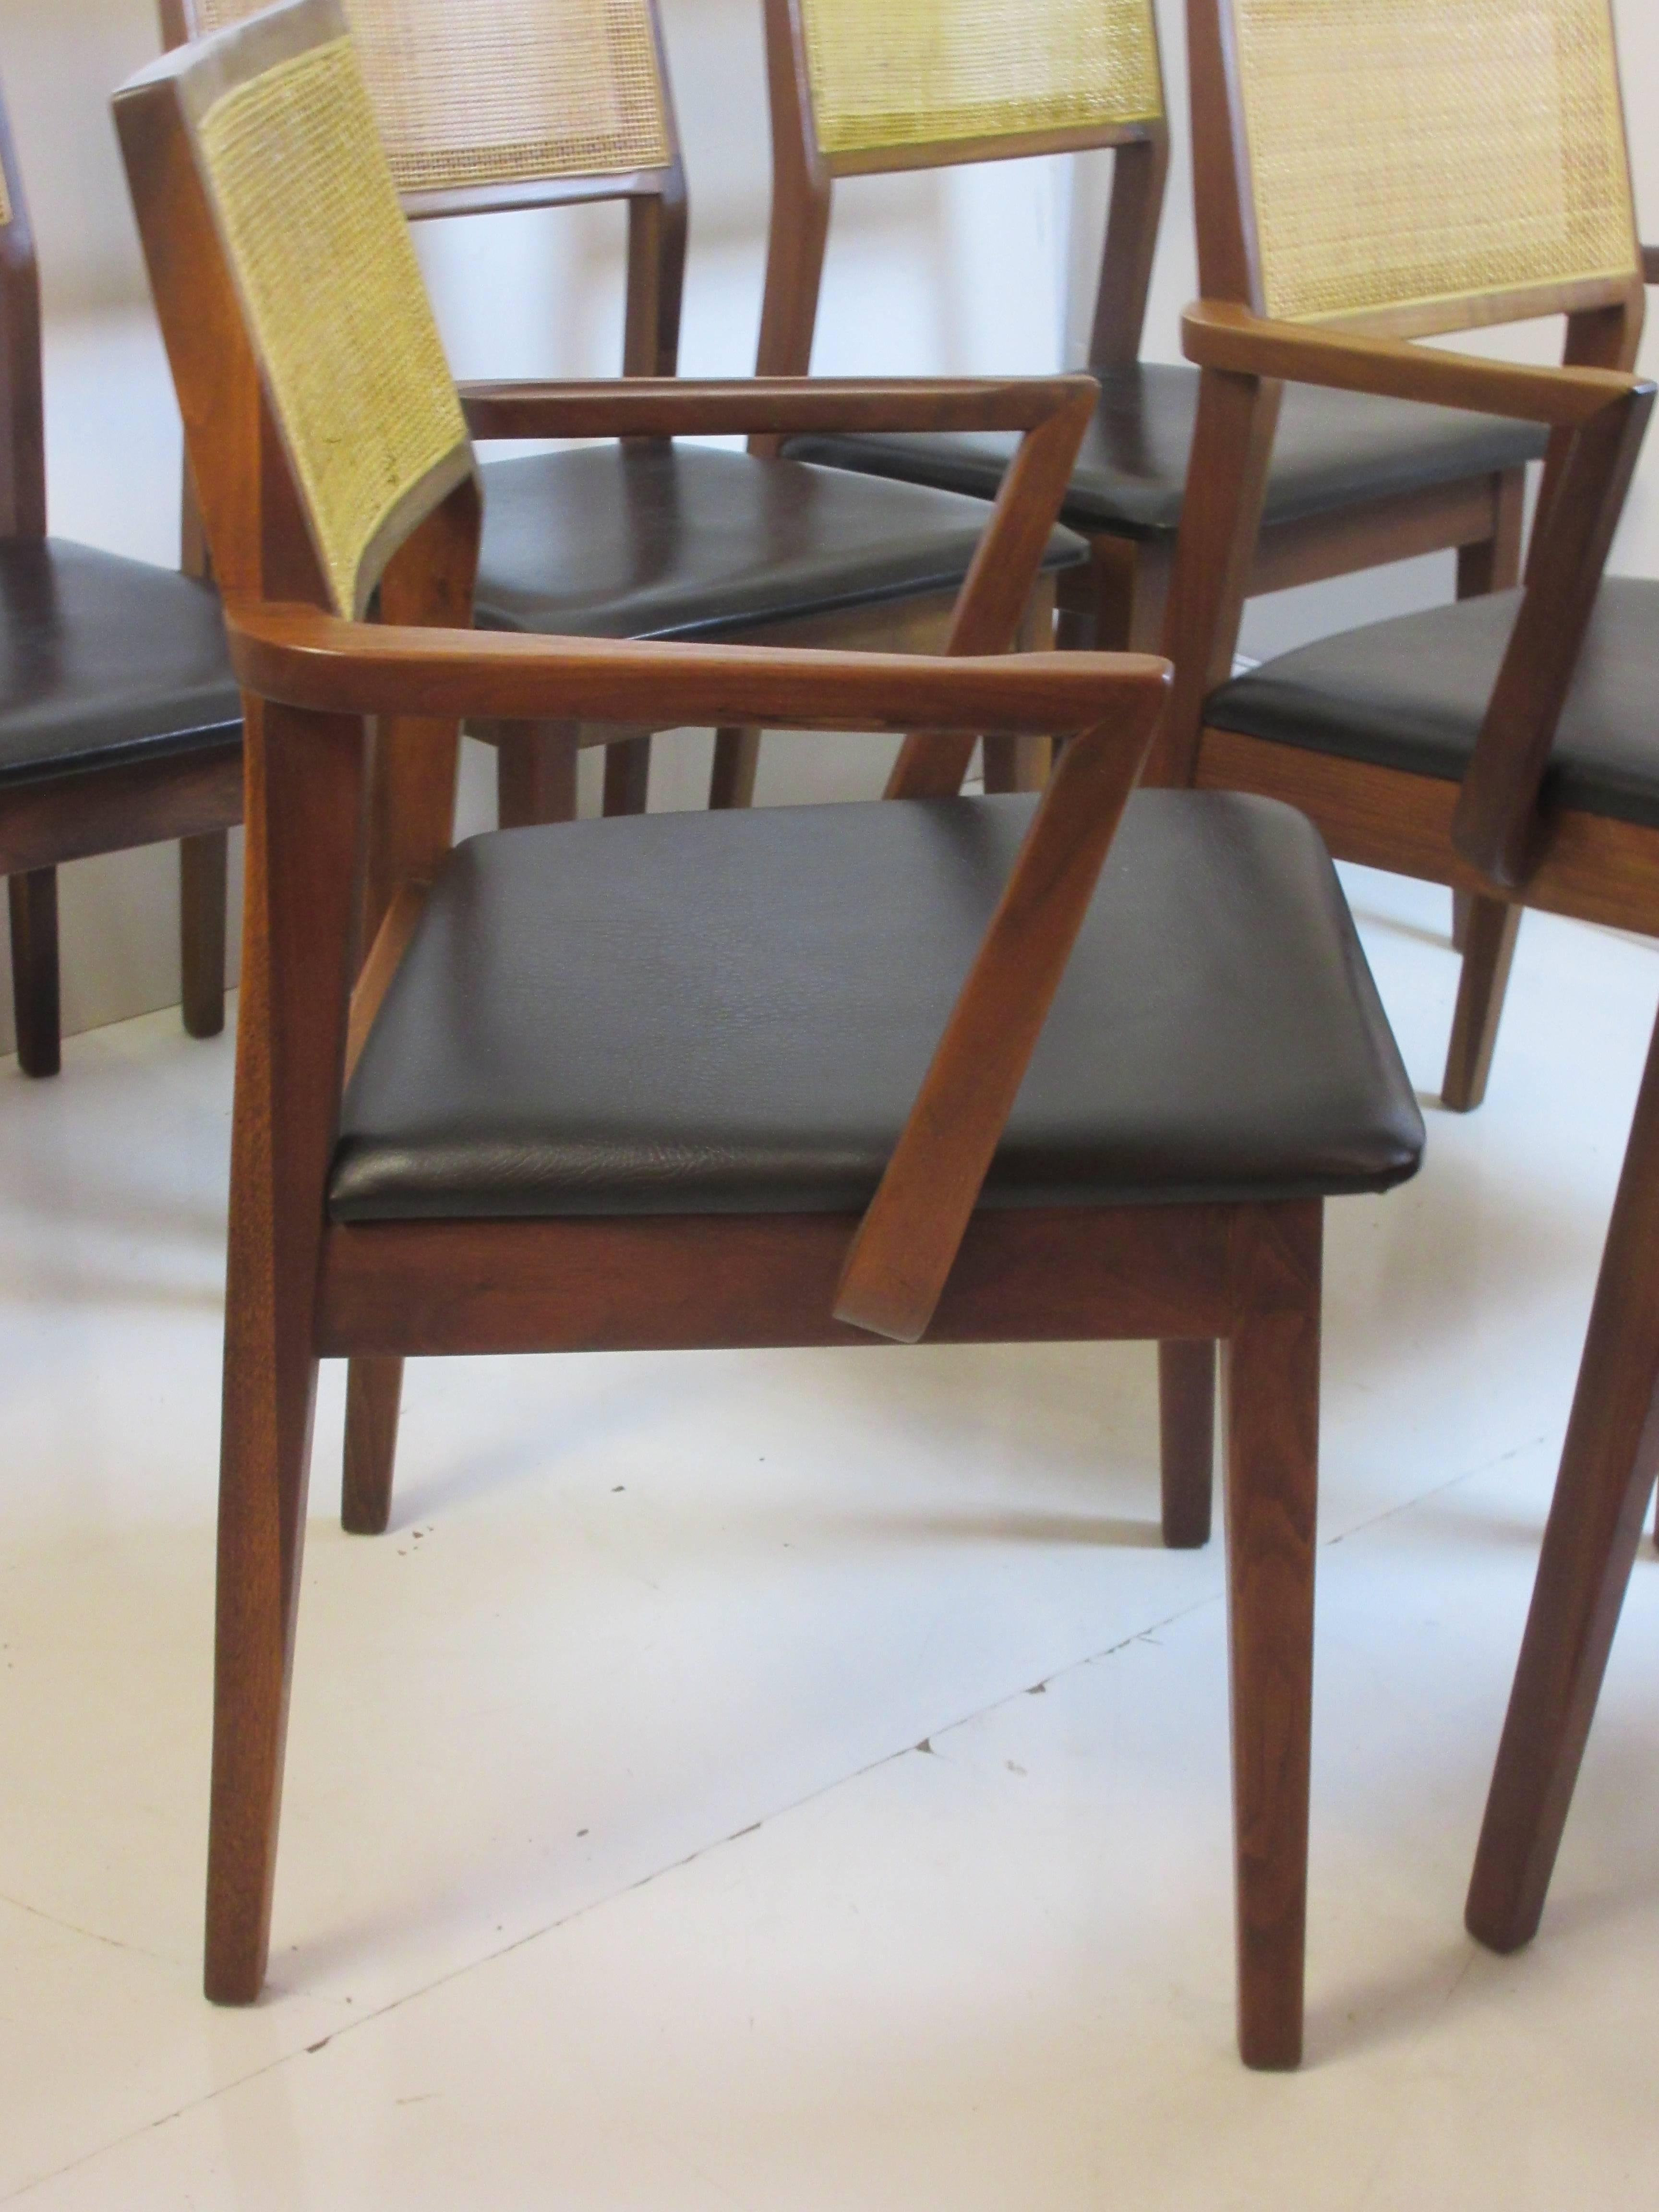 Founders for Thomasville walnut Jack Cartwright dining chairs with caned backs and original black vinyl seats. Both caning and vinyl in great shape. Seats are easily removed for re-upholstering. Chairs are remarkably small in scale but yet as